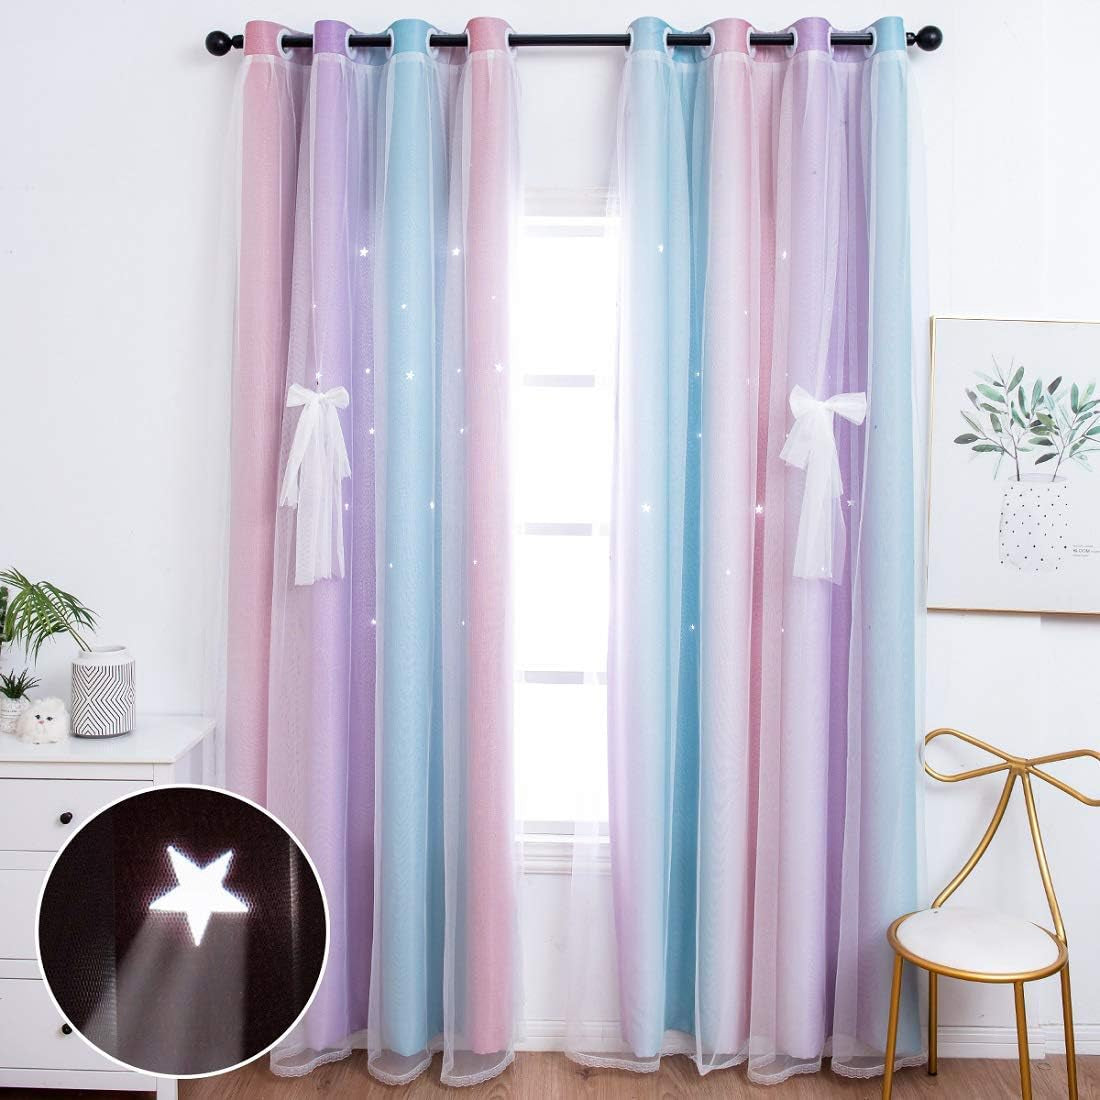 UNISTAR 2 Panels Stars Blackout Curtains for Bedroom Girls Kids Baby Window Decoration Double Layer Star Cut Out Aesthetic Living Room Decor Wall Home Curtain,W52 X L63 Inches,Pink  UNISTAR 2 Panels 丨 Double Side-Pinkpurple 63.00" X 52.00" 